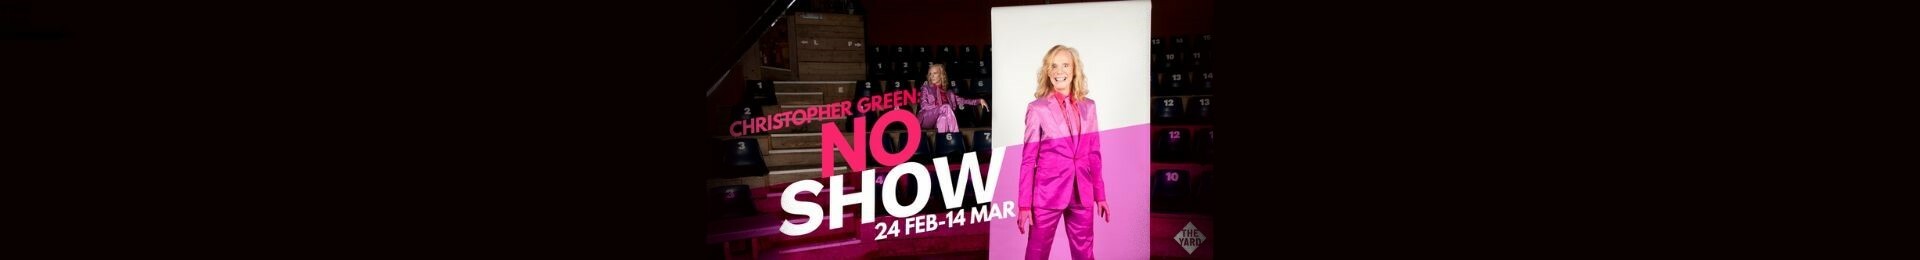 Christopher Green: No Show banner image